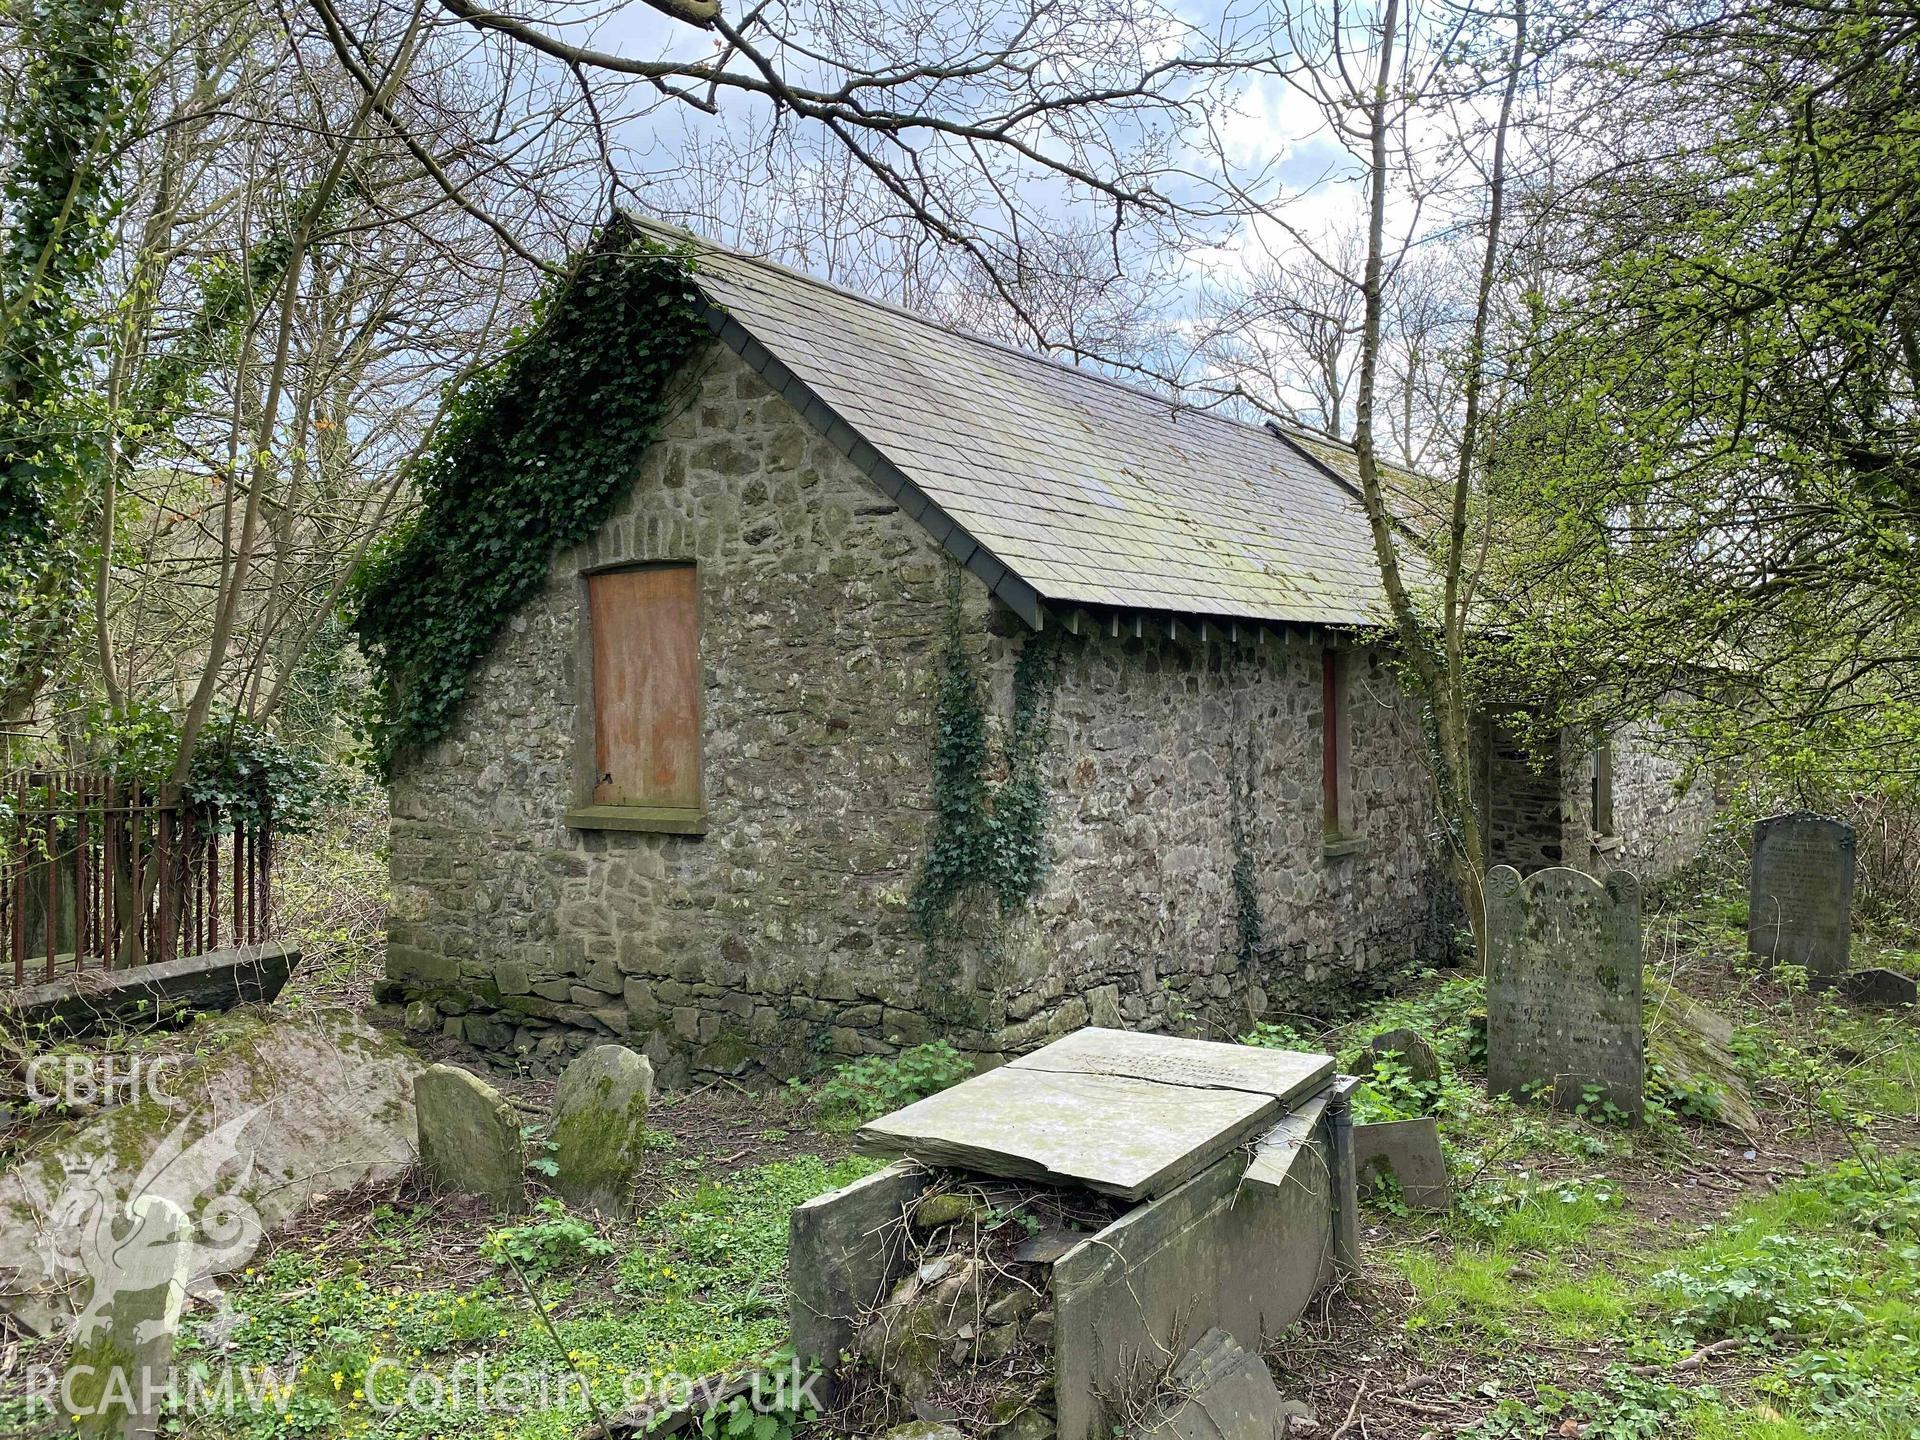 Digital photograph showing rear exterior of St Justinian's Church, Llanstinian, produced by Paul Davis in 2020